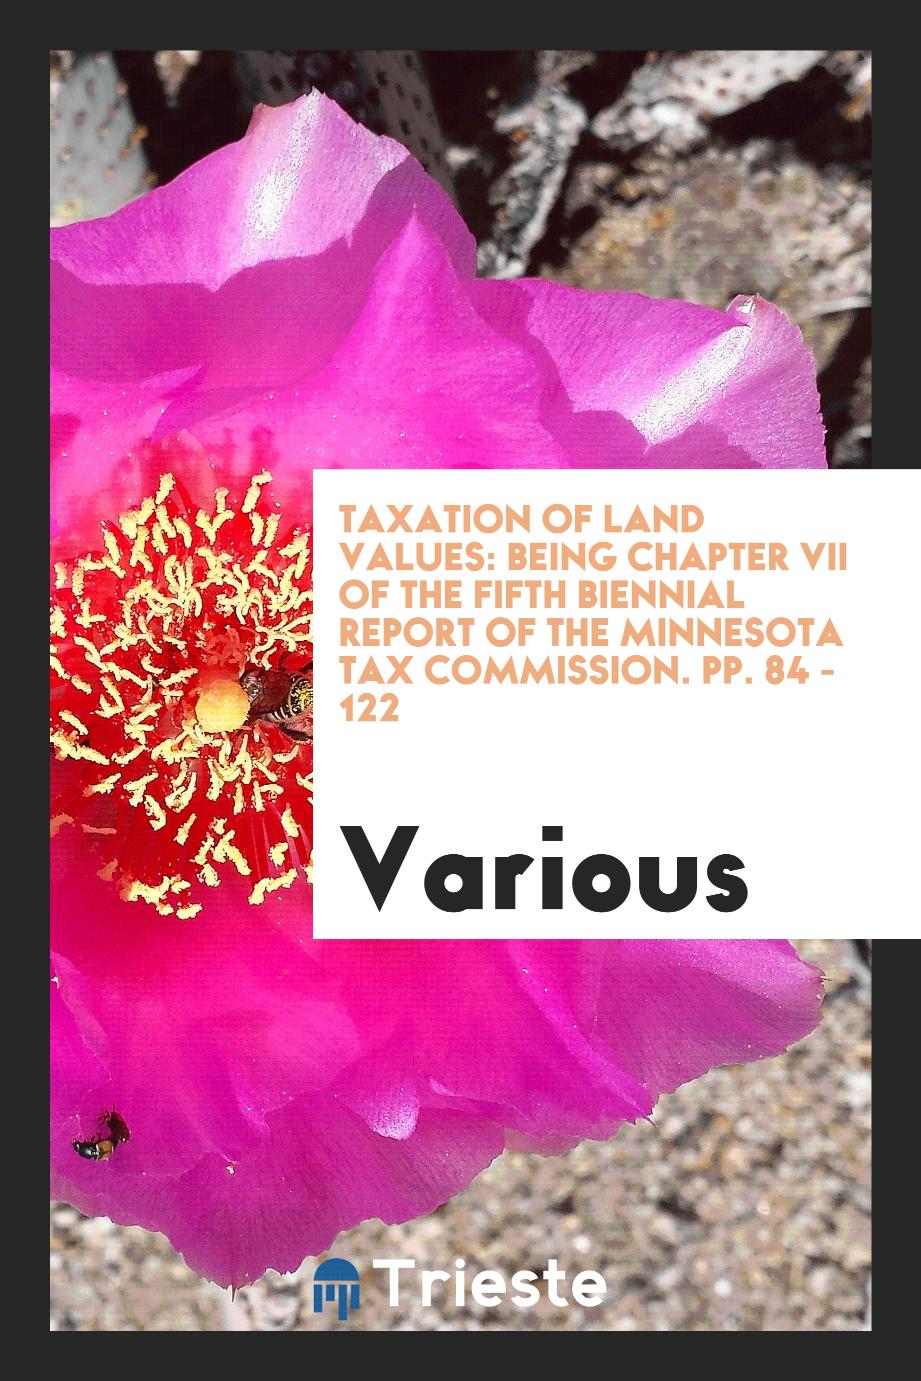 Taxation of Land Values: being chapter vii of the fifth biennial report of the Minnesota Tax Commission. pp. 84 - 122